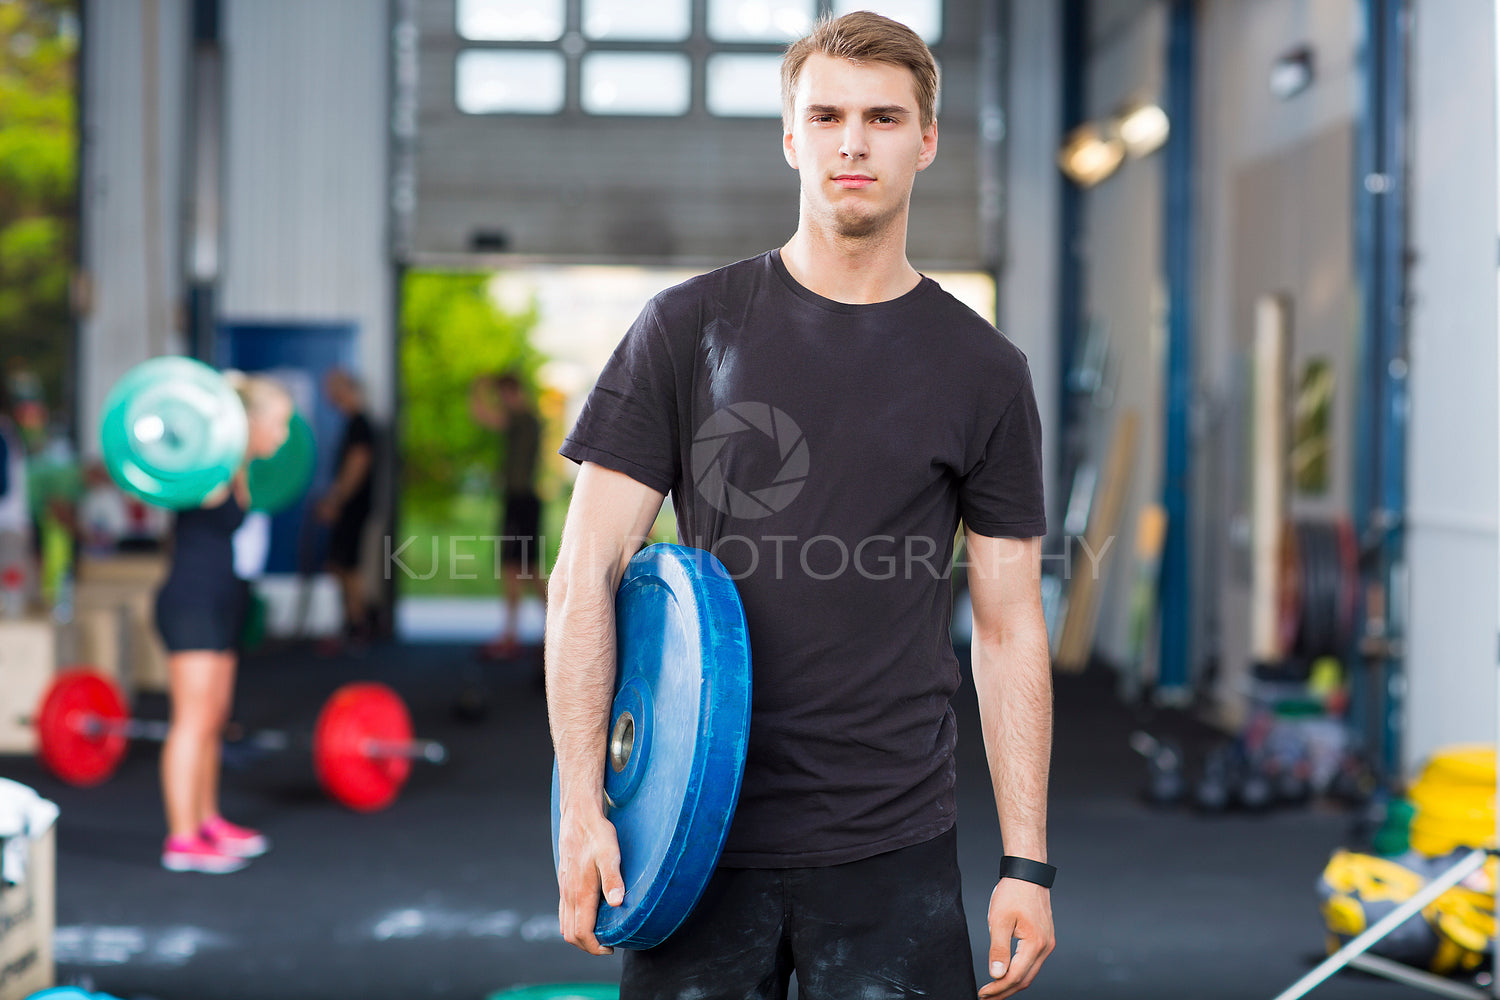 Determined Athlete Carrying Weight Plate In Health Club